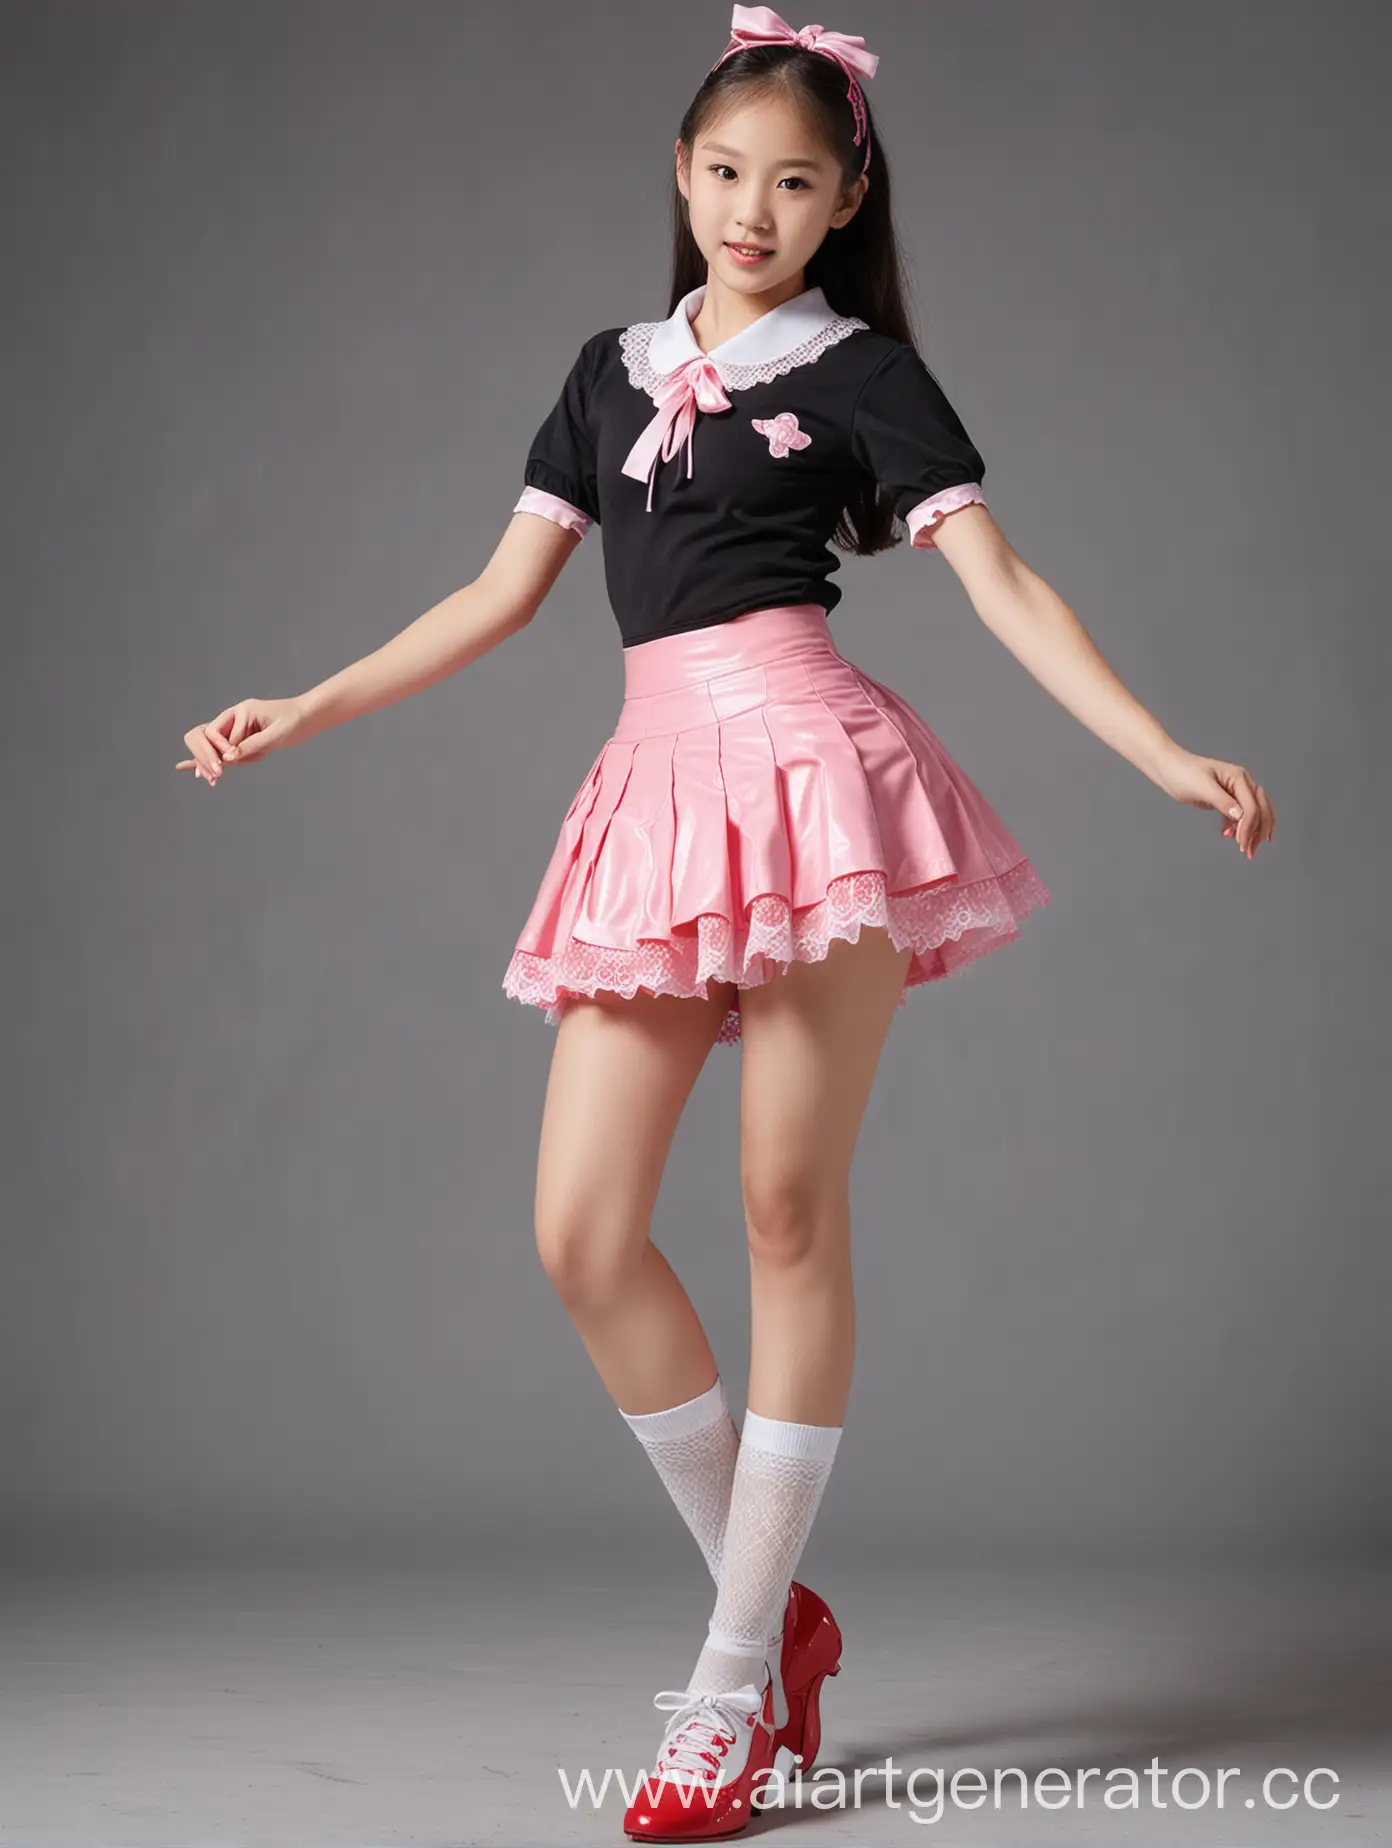 Asian-Middle-School-Student-in-Pink-Dance-Costume-and-Red-HighHeeled-Shoes